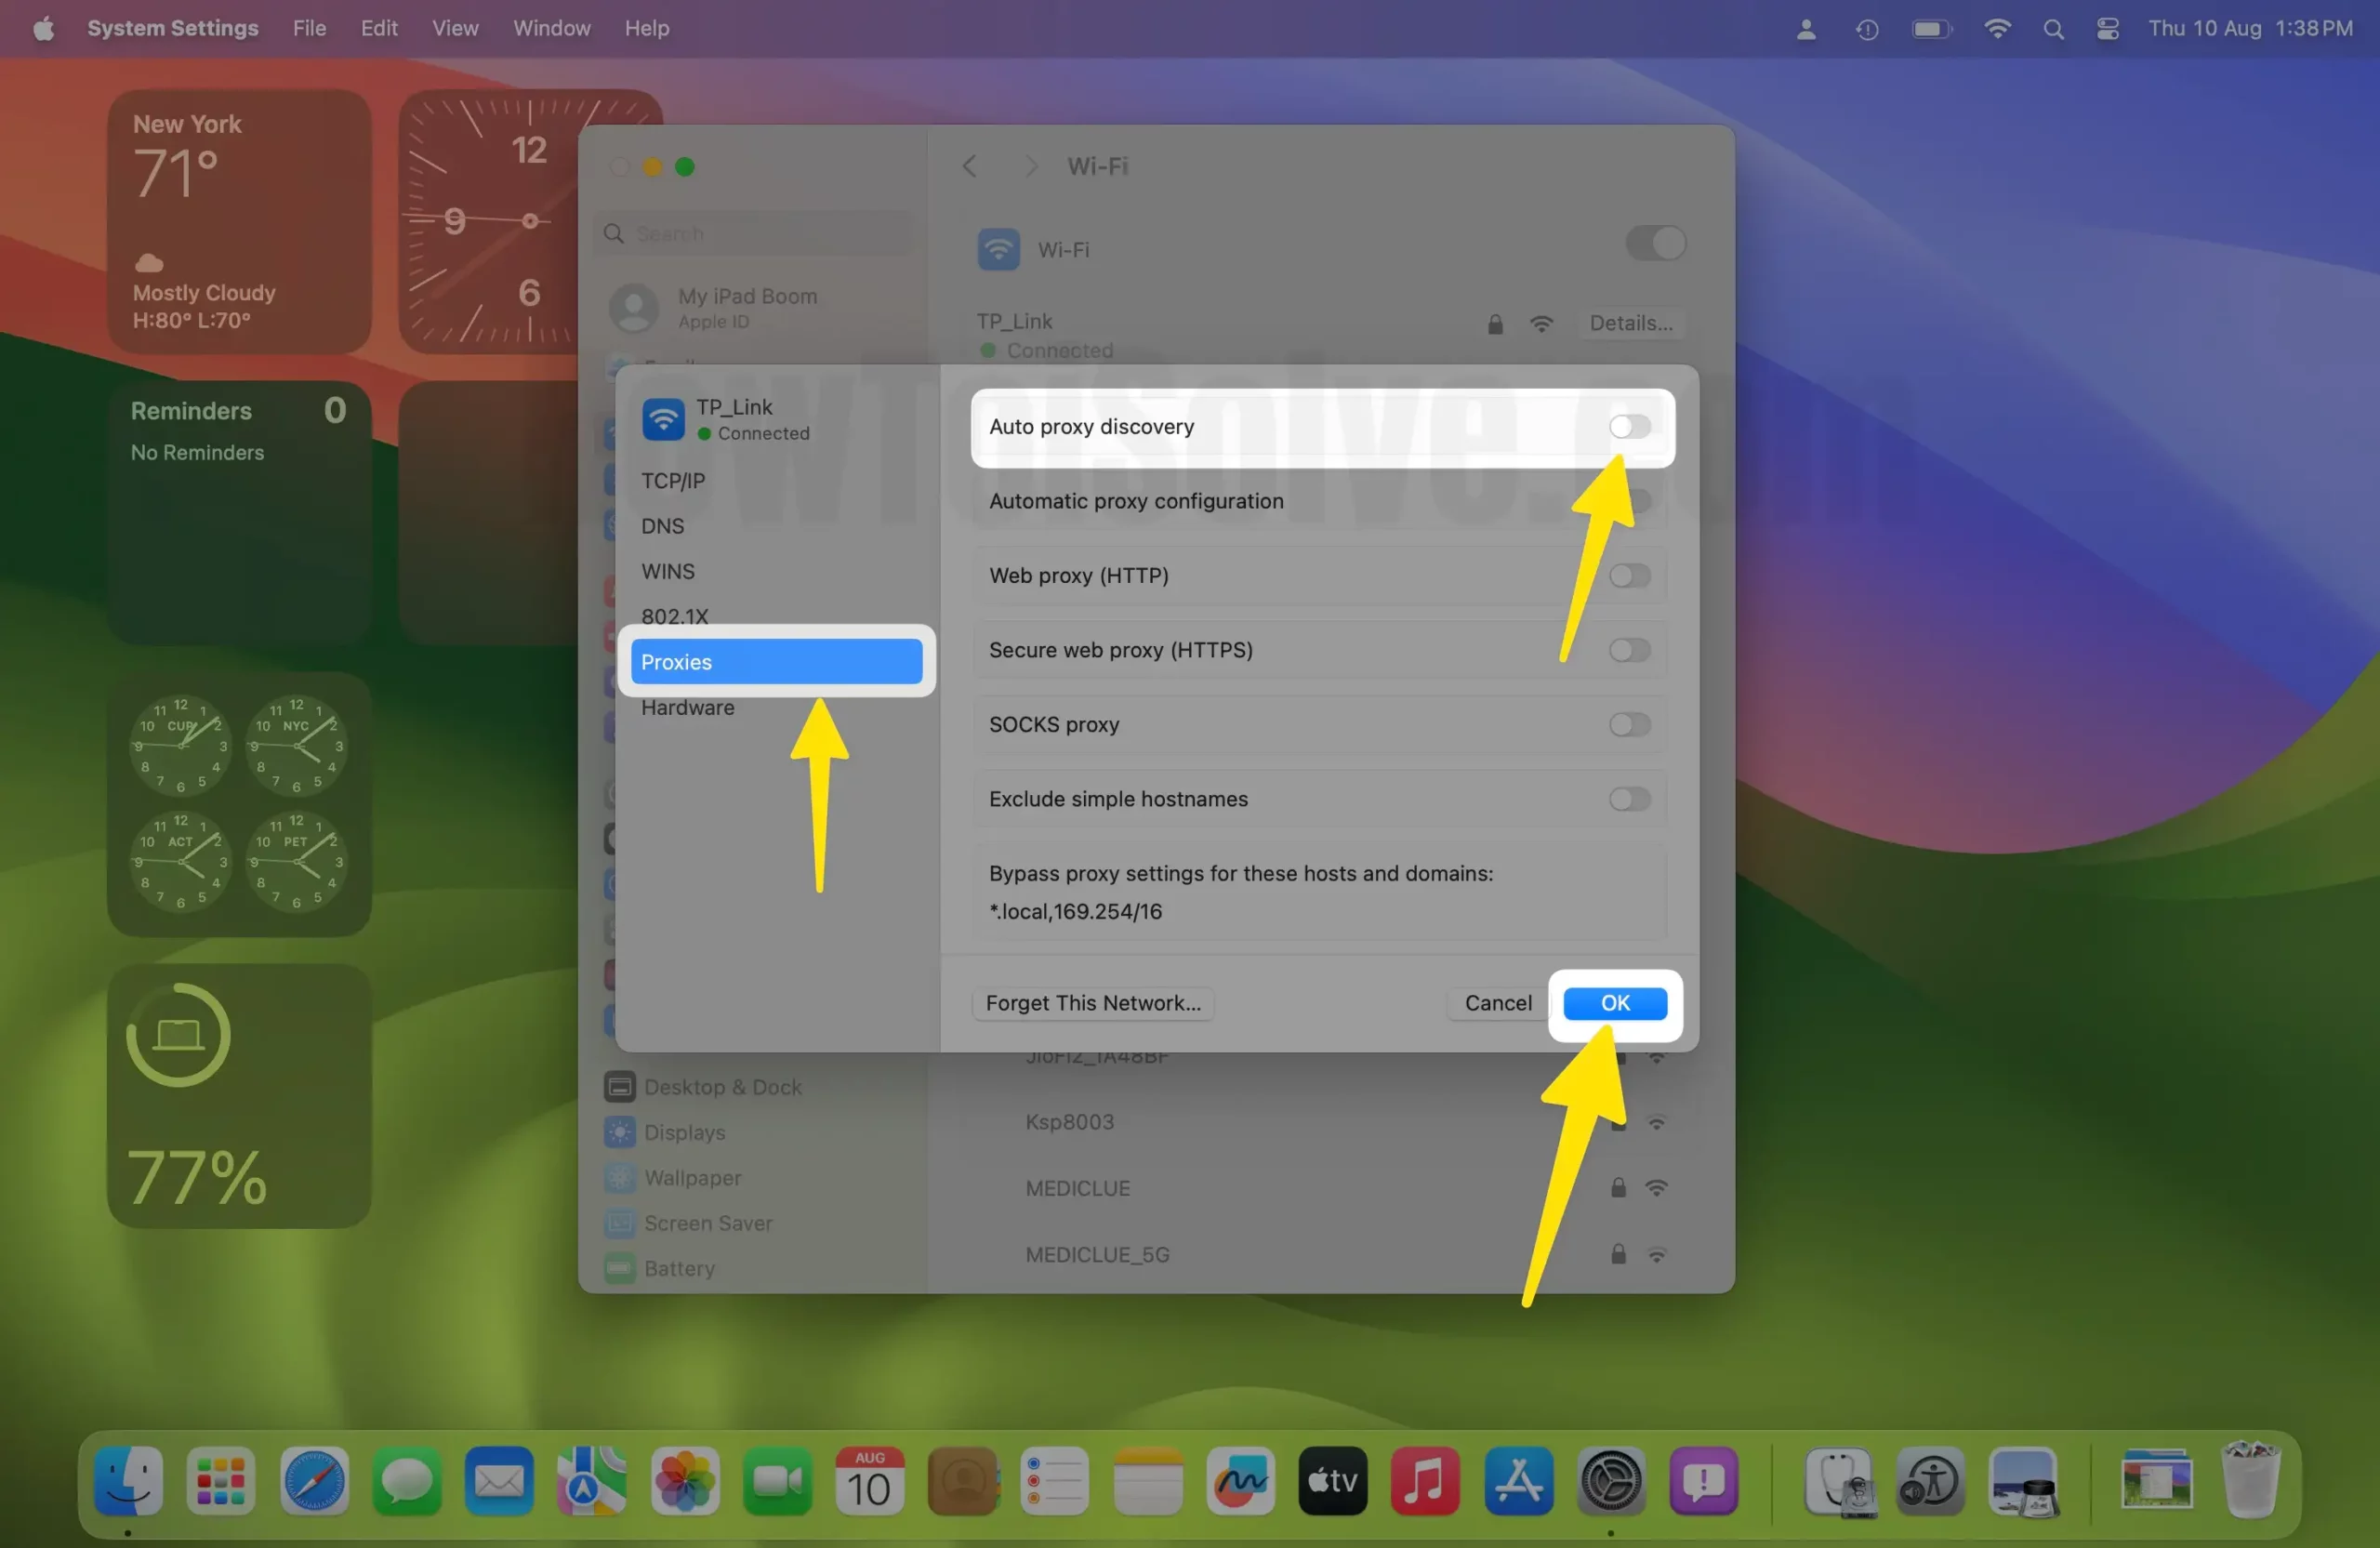 Disable Automatic Proxy on Mac